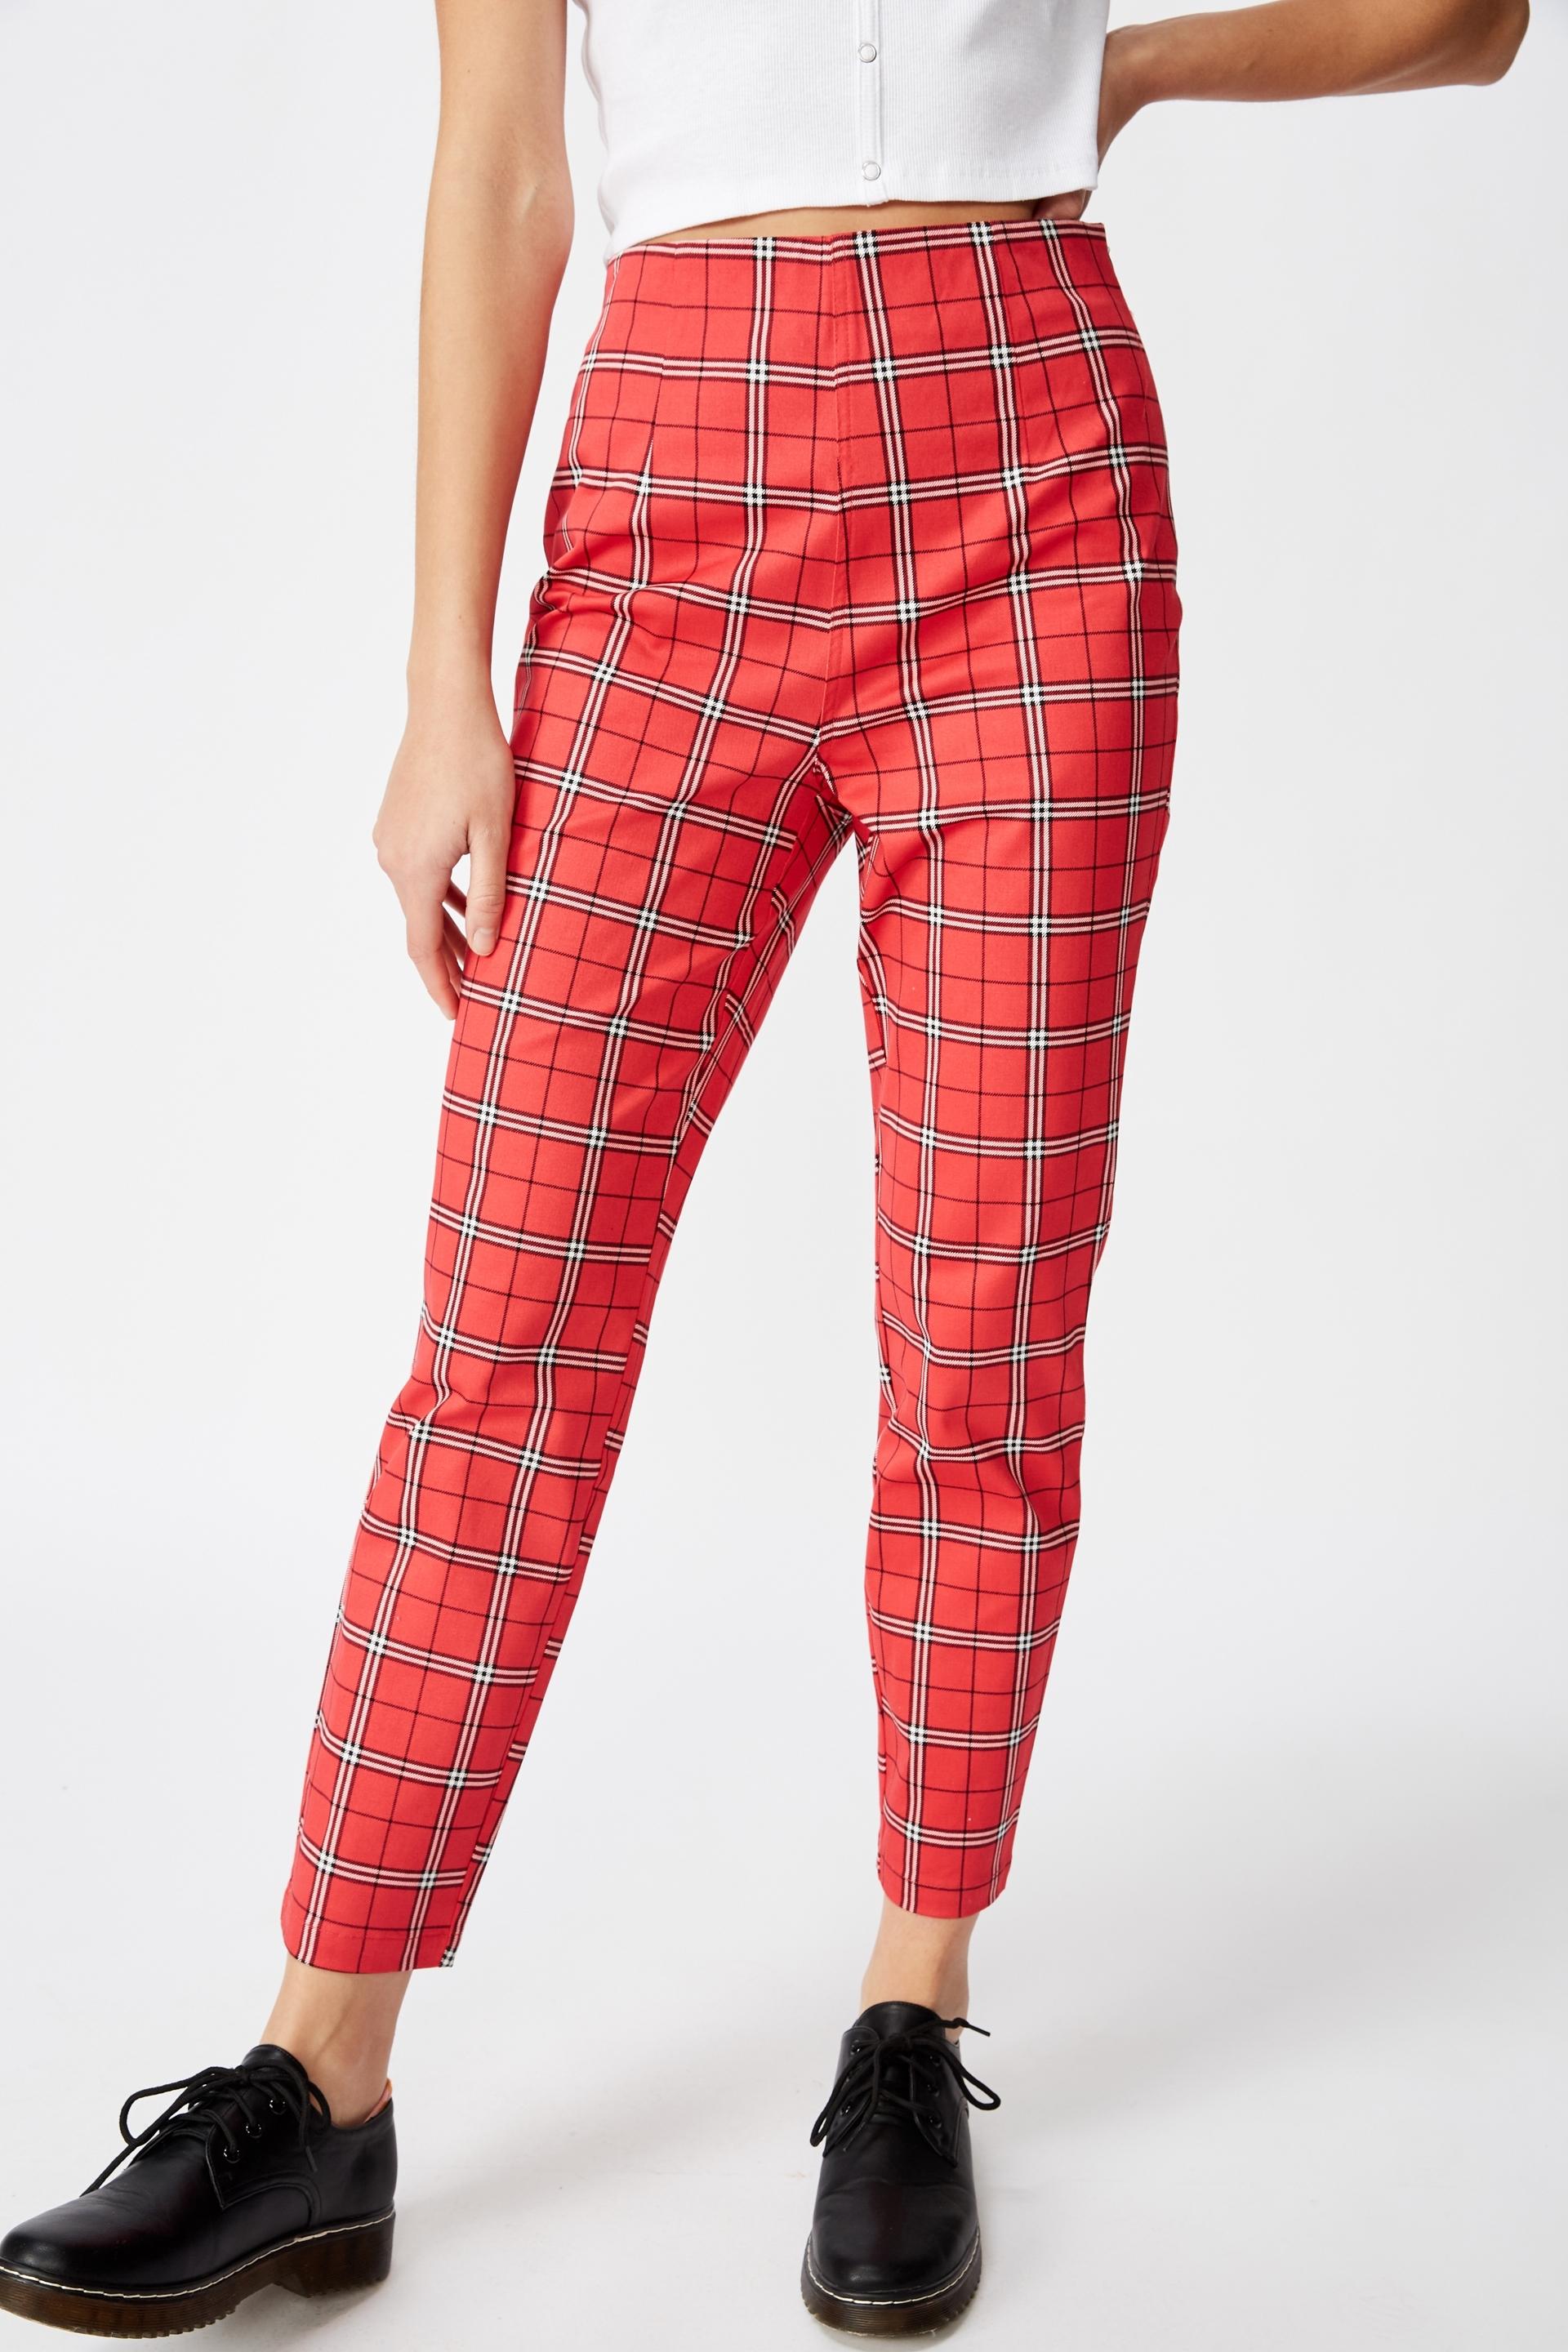 Stretch skinny pant - londyn check/red Factorie Jeans | Superbalist.com